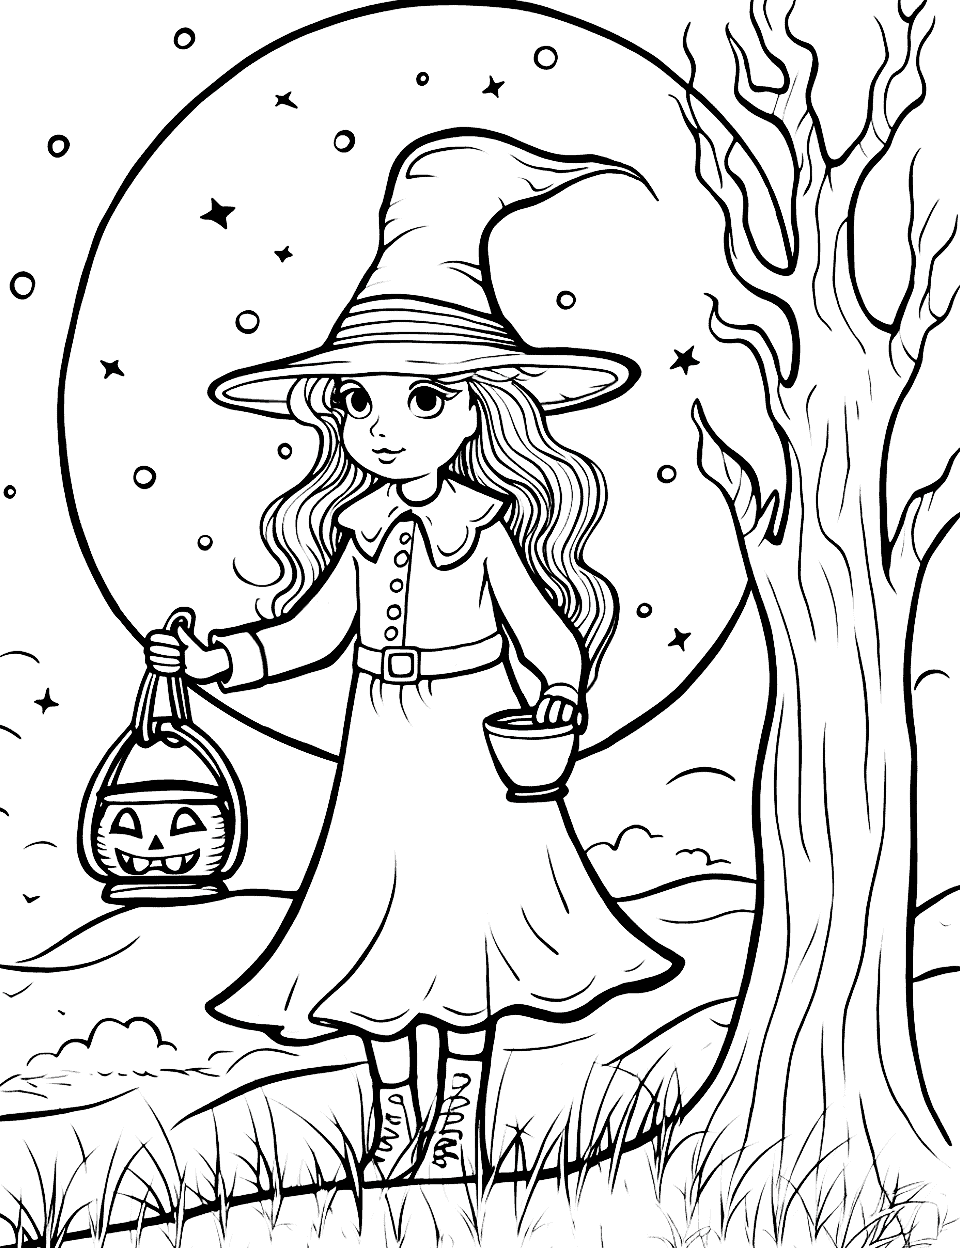 Nighttime Witch Adventure Coloring Page - A witch exploring a forest under a full moon with a lantern in hand.